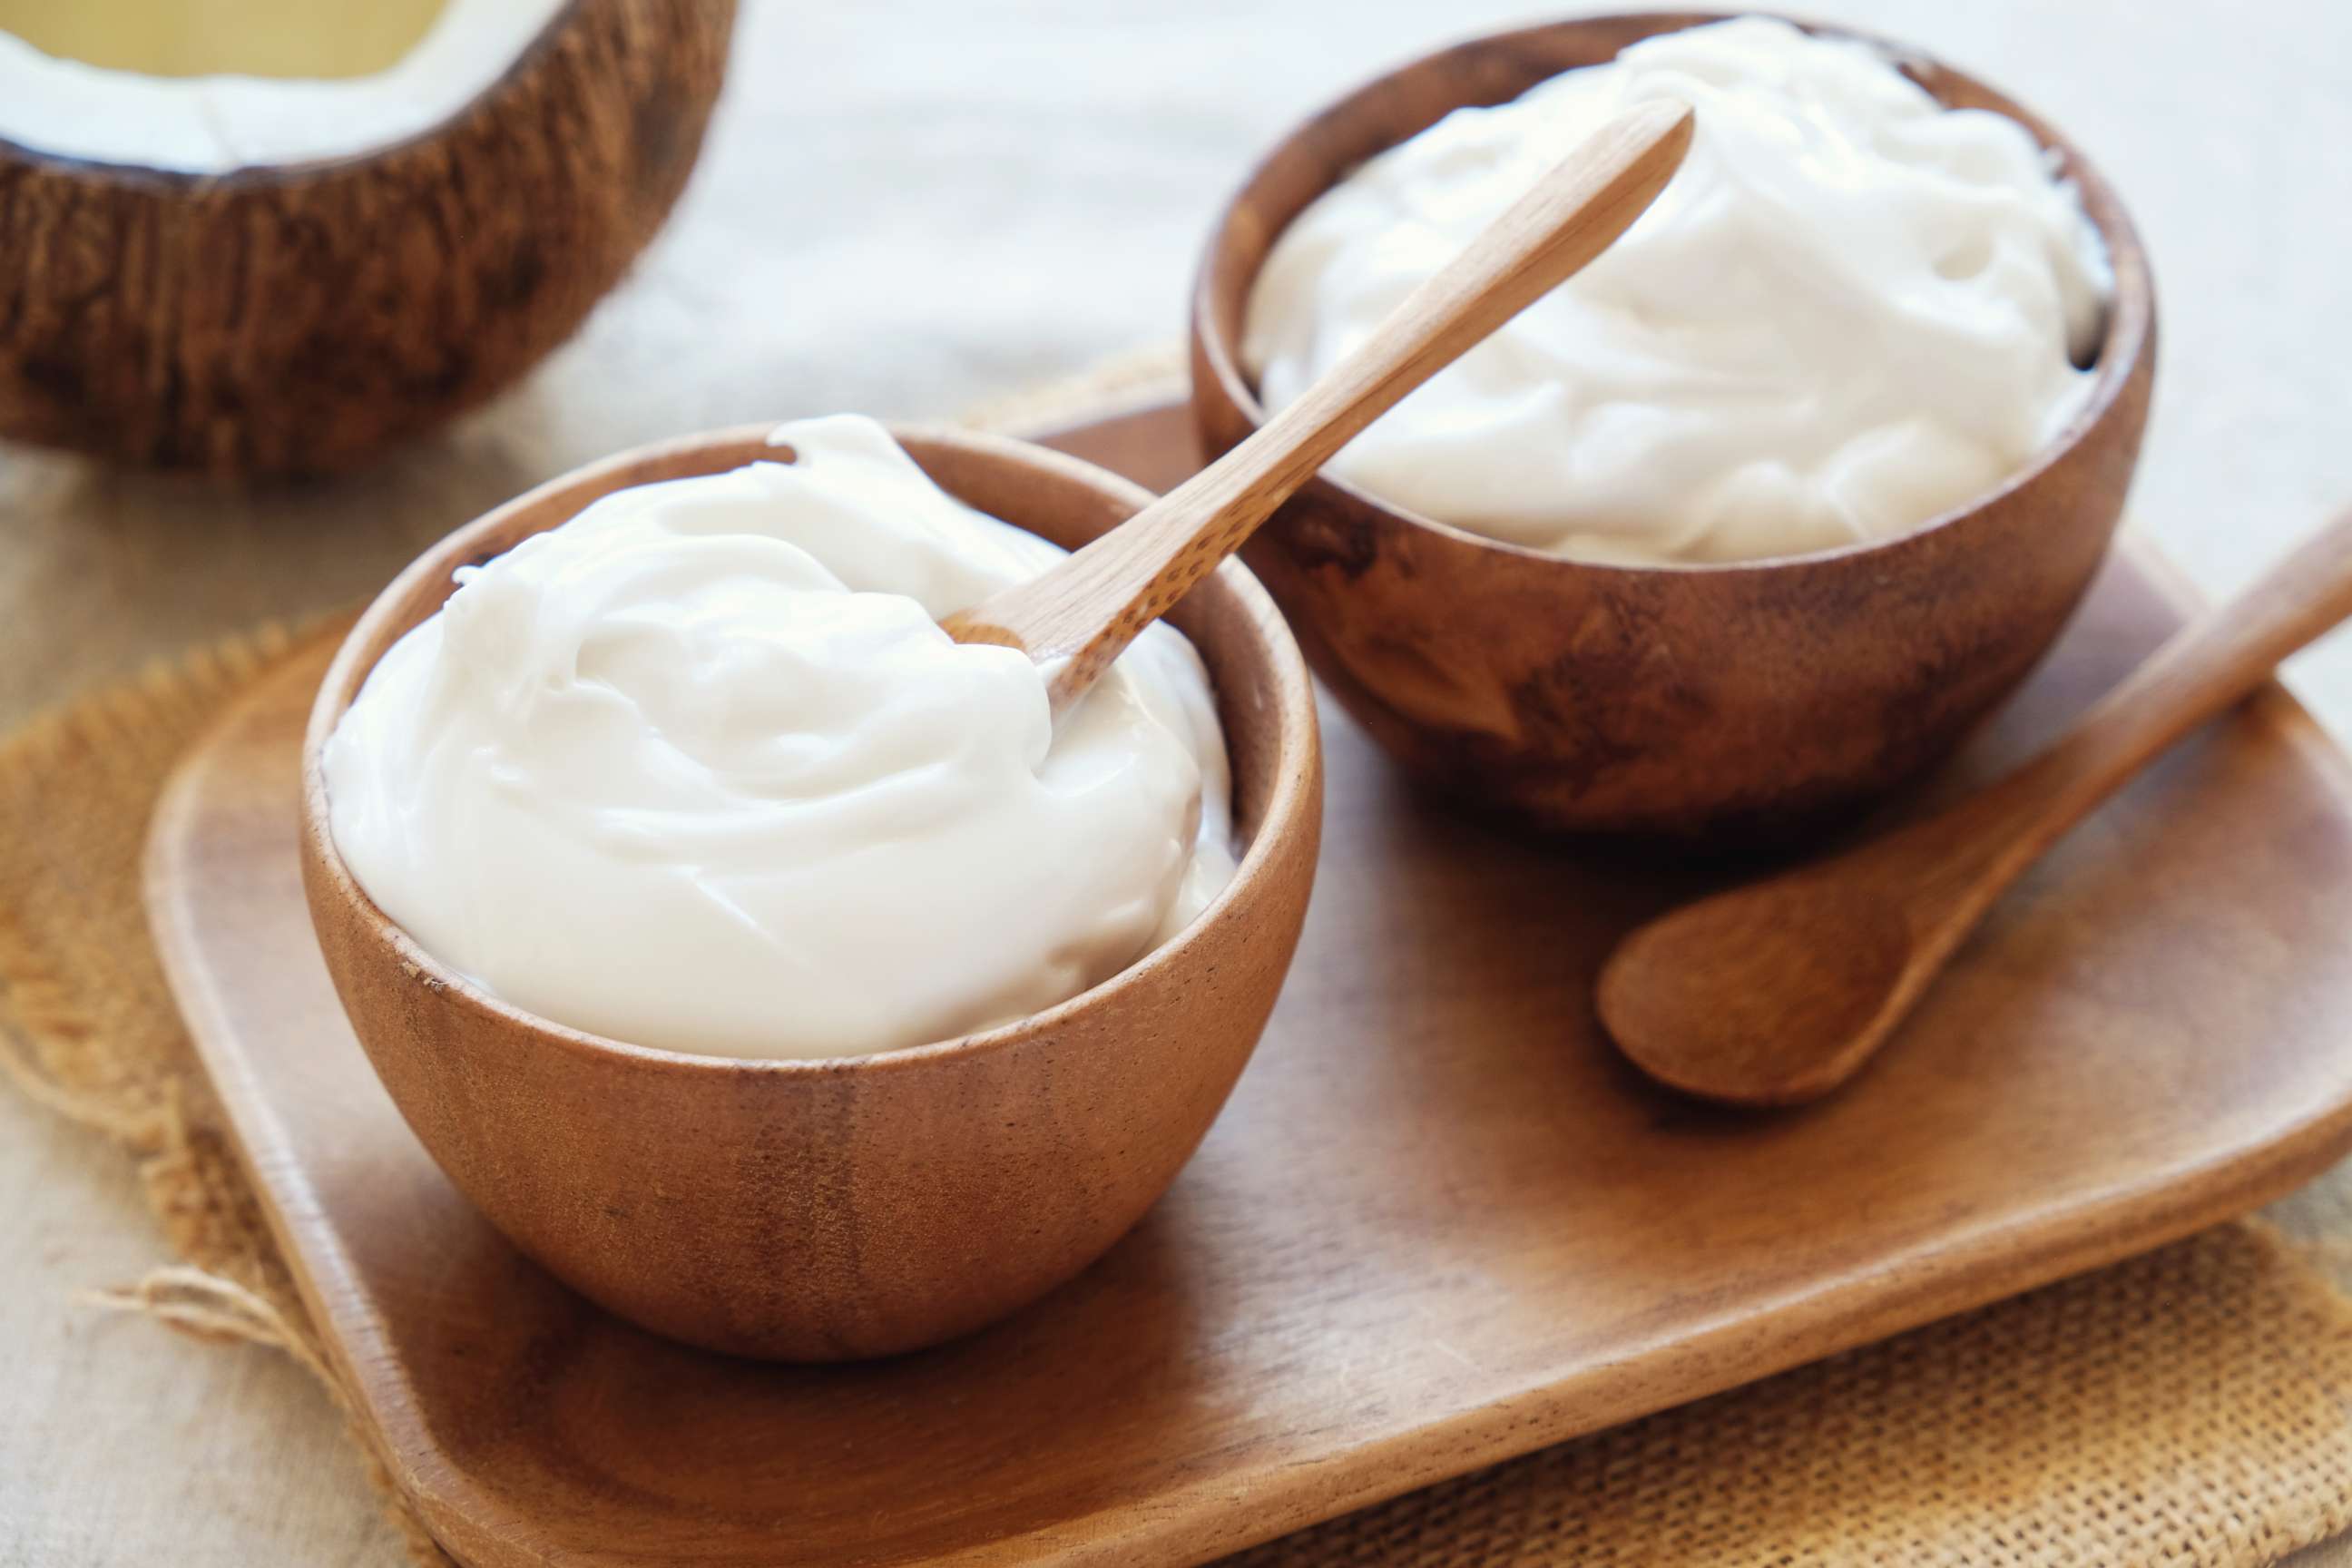 PHOTO: Dairy free organic coconut yogurt in wooden bowl is pictured in this undated photo.